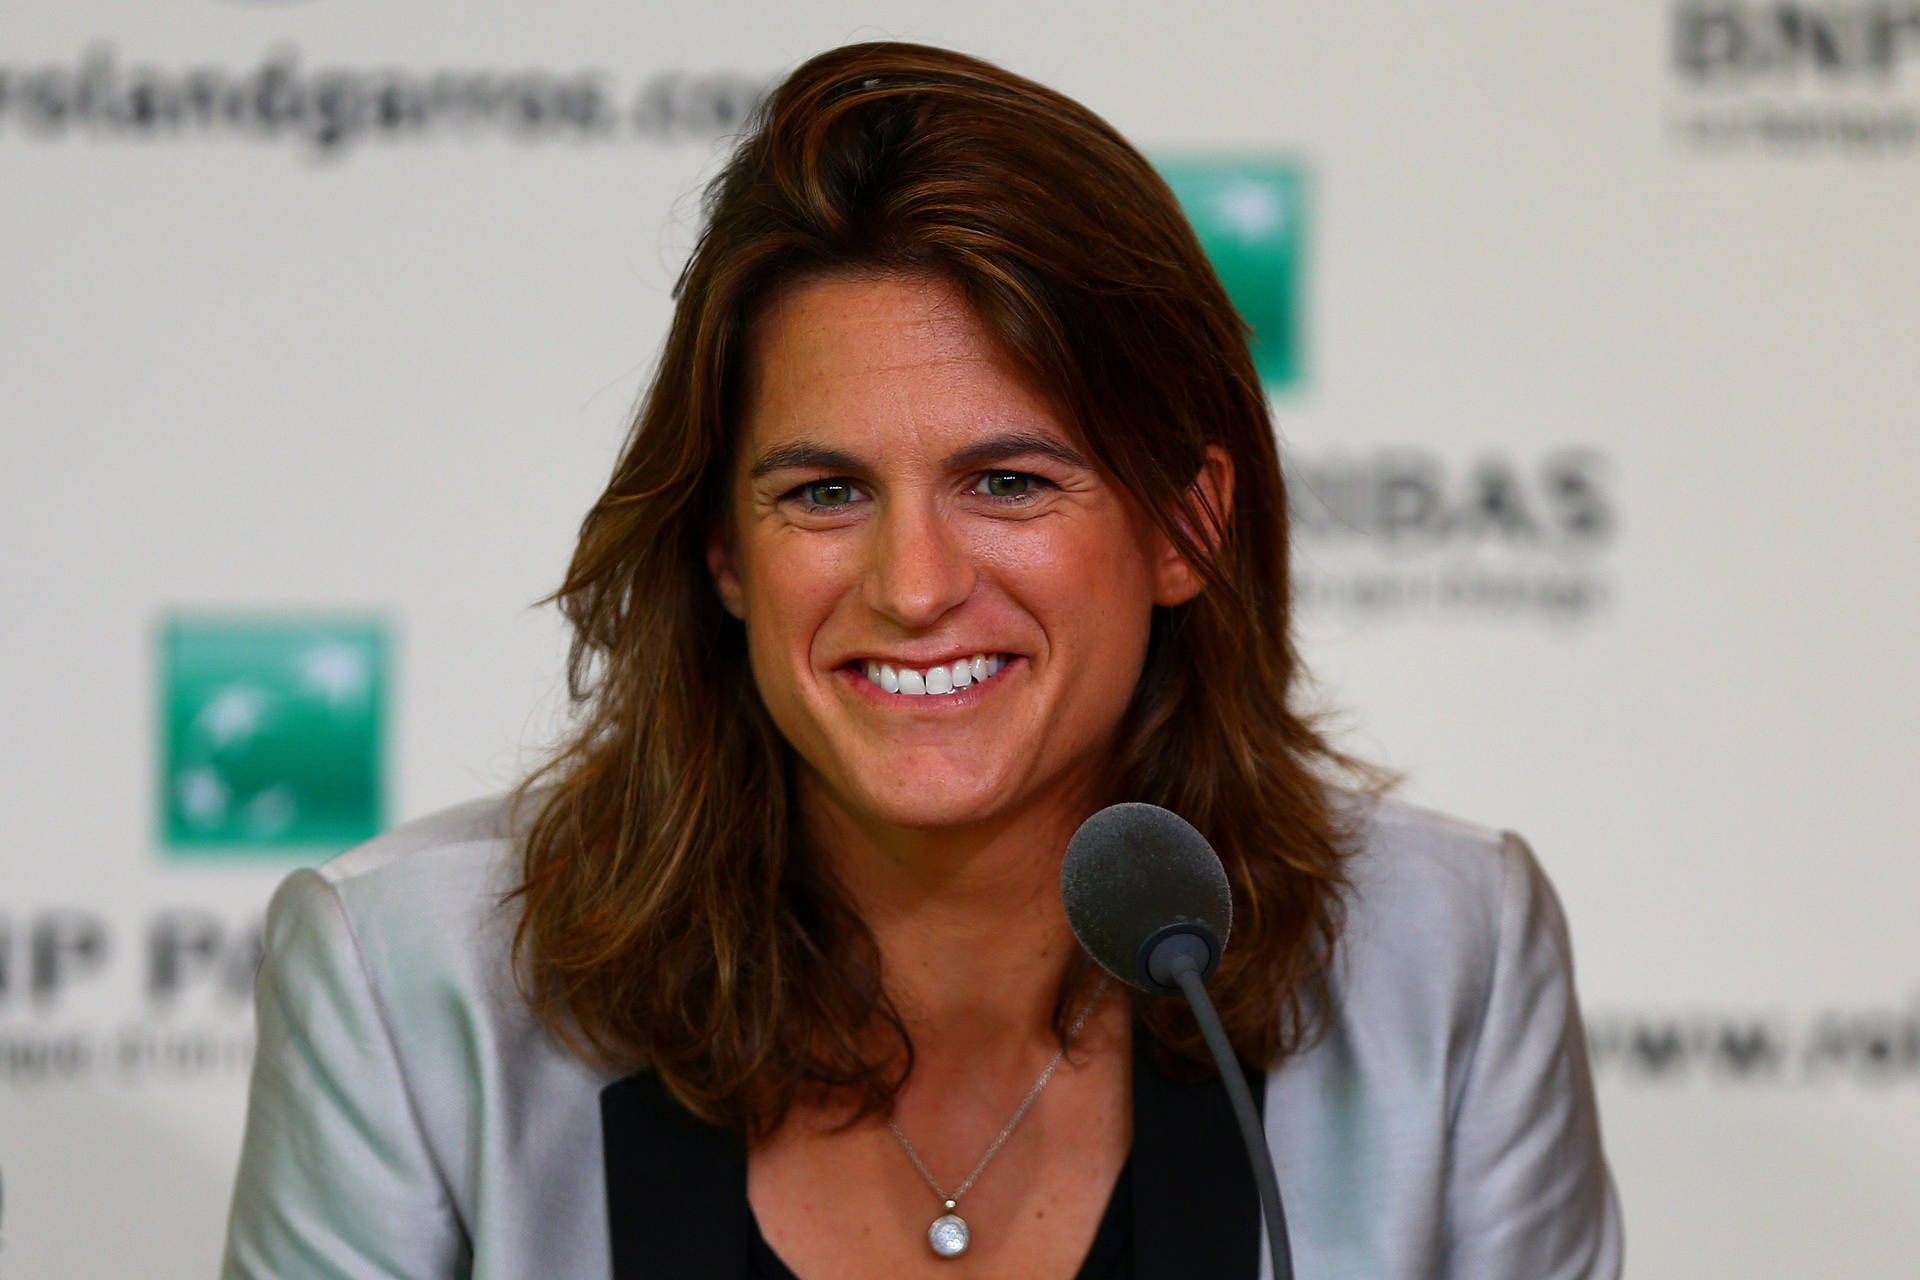 Amélie Mauresmo at a Press Conference Wallpaper